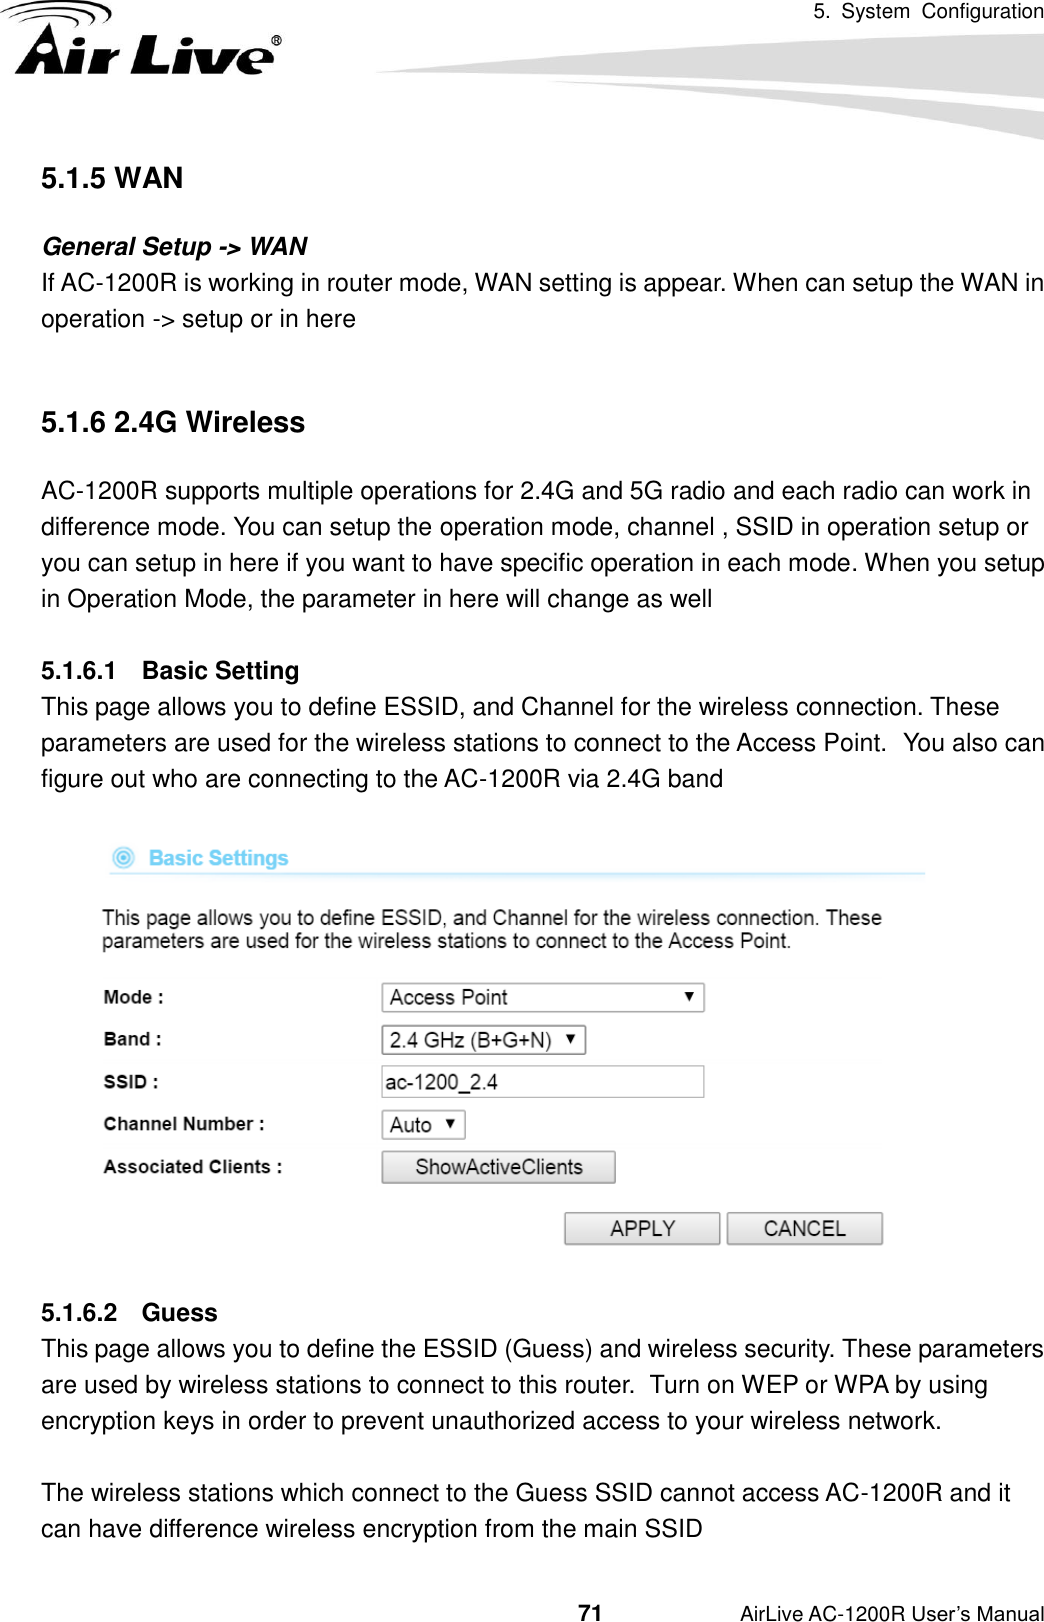 5.  System  Configuration                                         71           AirLive AC-1200R User’s Manual 5.1.5 WAN General Setup -&gt; WAN If AC-1200R is working in router mode, WAN setting is appear. When can setup the WAN in operation -&gt; setup or in here  5.1.6 2.4G Wireless AC-1200R supports multiple operations for 2.4G and 5G radio and each radio can work in difference mode. You can setup the operation mode, channel , SSID in operation setup or you can setup in here if you want to have specific operation in each mode. When you setup in Operation Mode, the parameter in here will change as well  5.1.6.1  Basic Setting This page allows you to define ESSID, and Channel for the wireless connection. These parameters are used for the wireless stations to connect to the Access Point.   You also can figure out who are connecting to the AC-1200R via 2.4G band      5.1.6.2  Guess This page allows you to define the ESSID (Guess) and wireless security. These parameters are used by wireless stations to connect to this router.  Turn on WEP or WPA by using encryption keys in order to prevent unauthorized access to your wireless network.  The wireless stations which connect to the Guess SSID cannot access AC-1200R and it can have difference wireless encryption from the main SSID   